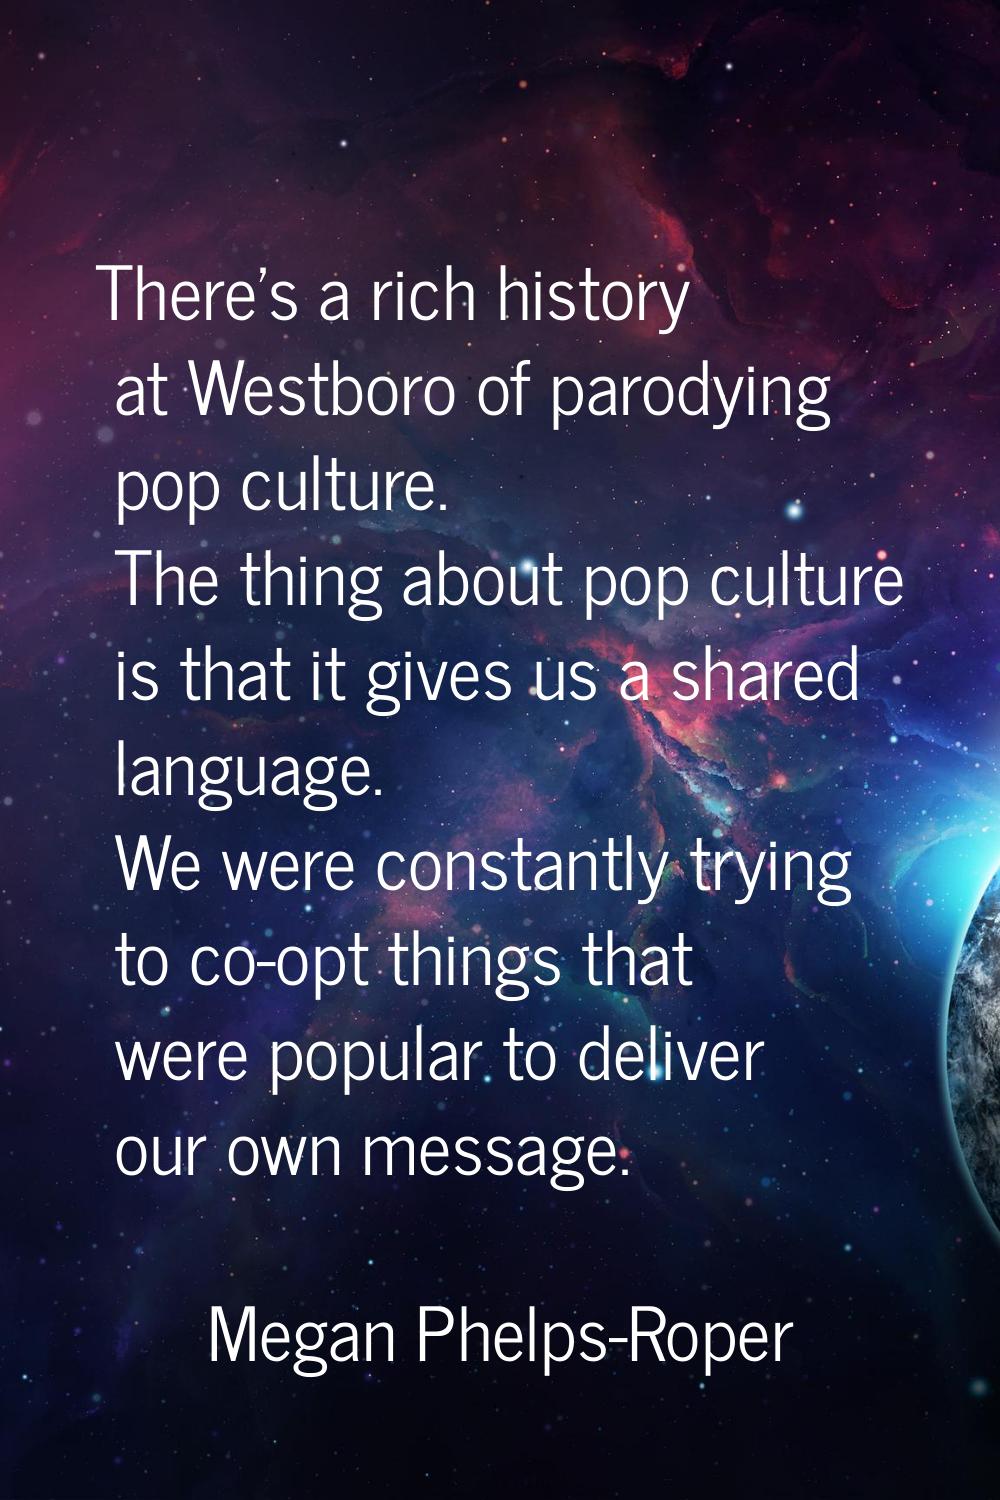 There's a rich history at Westboro of parodying pop culture. The thing about pop culture is that it